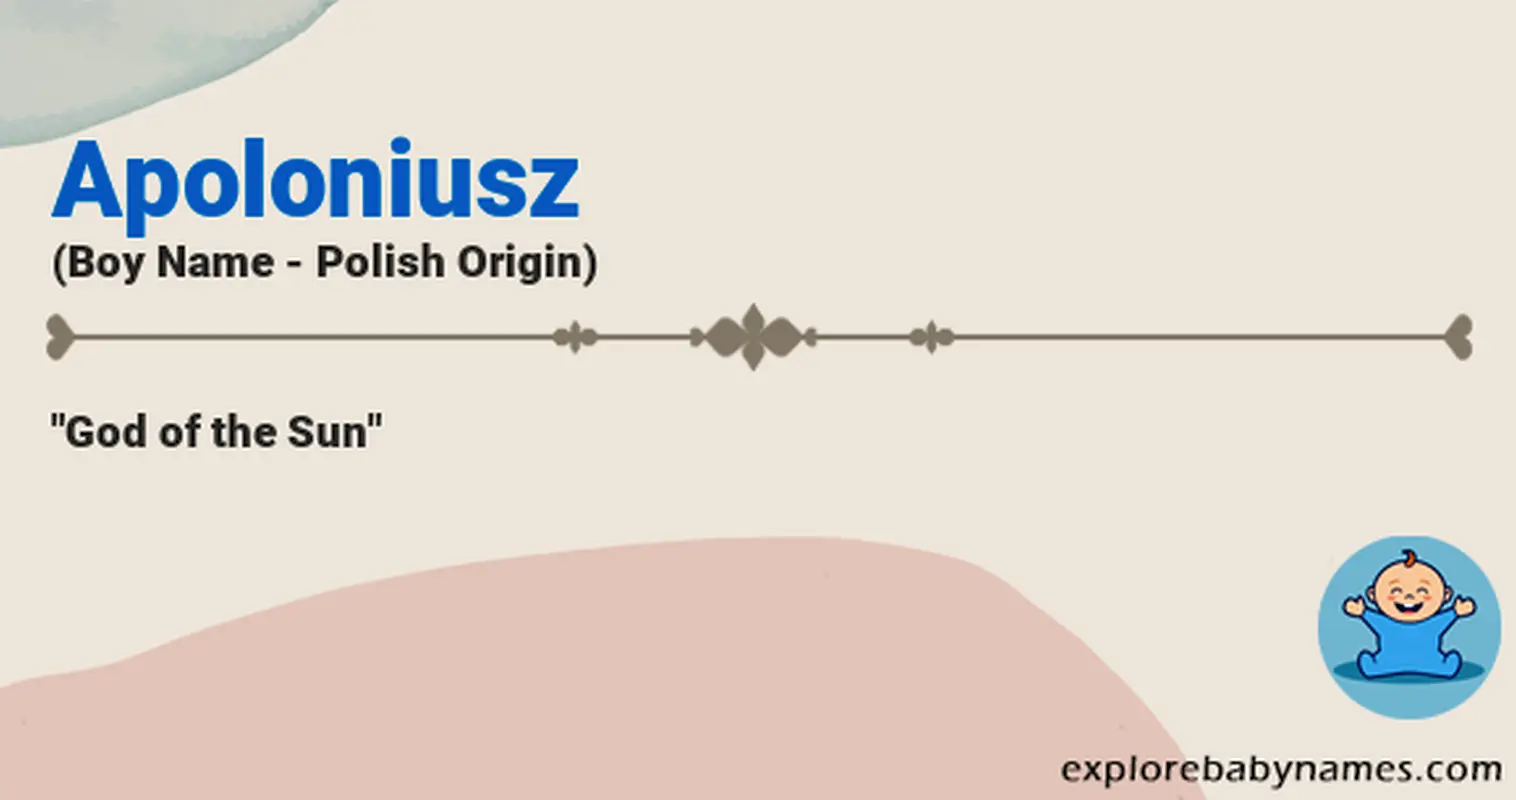 Meaning of Apoloniusz